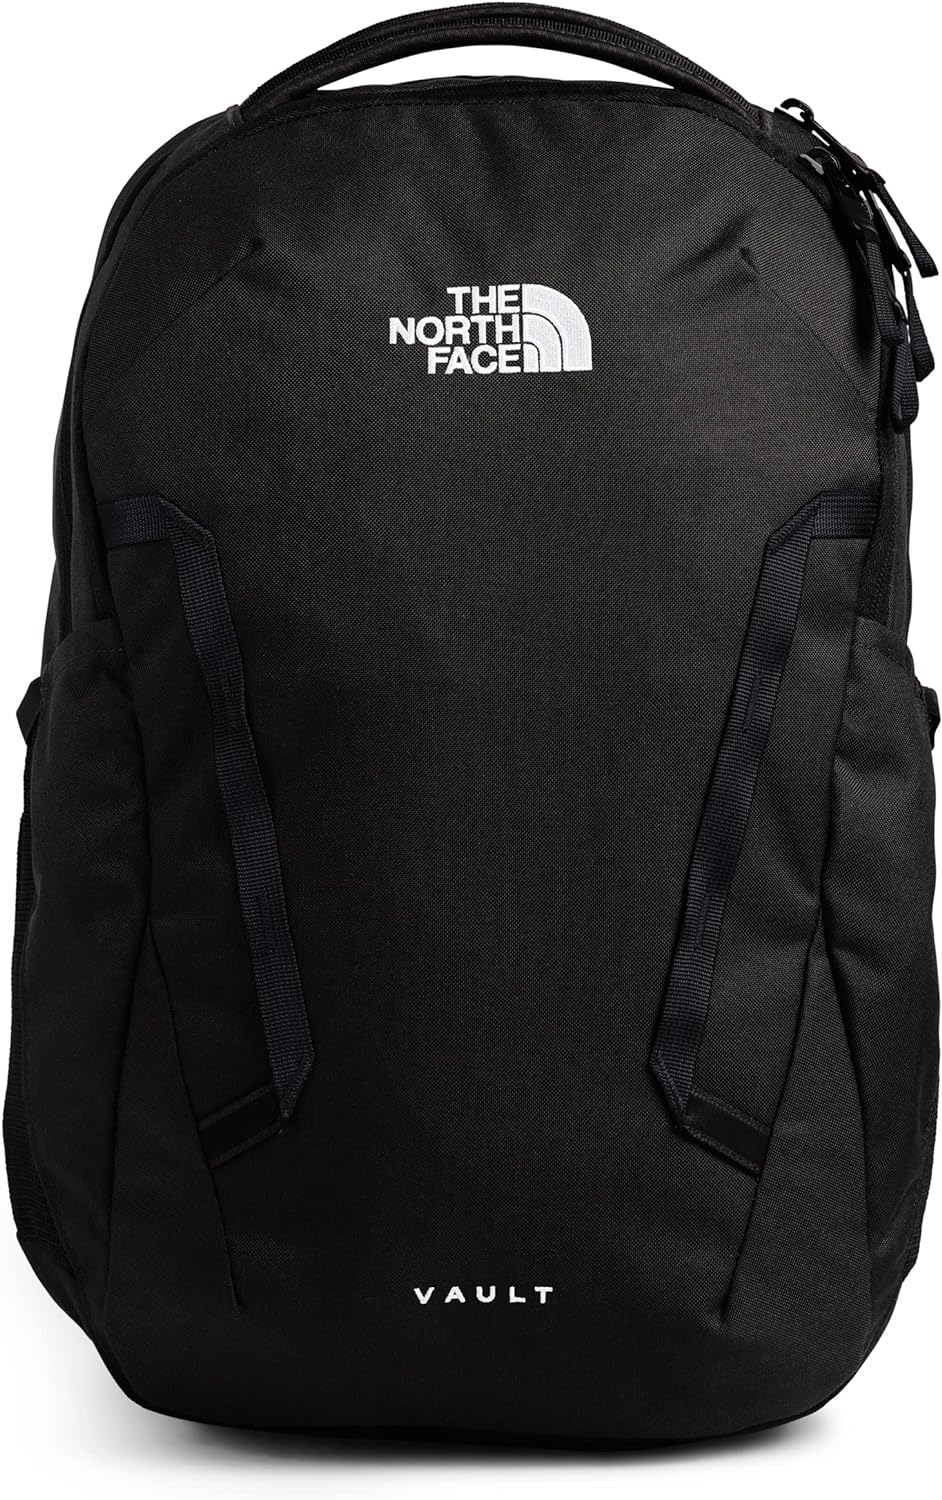 THE NORTH FACE Women’s Vault Everyday Laptop Backpack, TNF Black, One Size